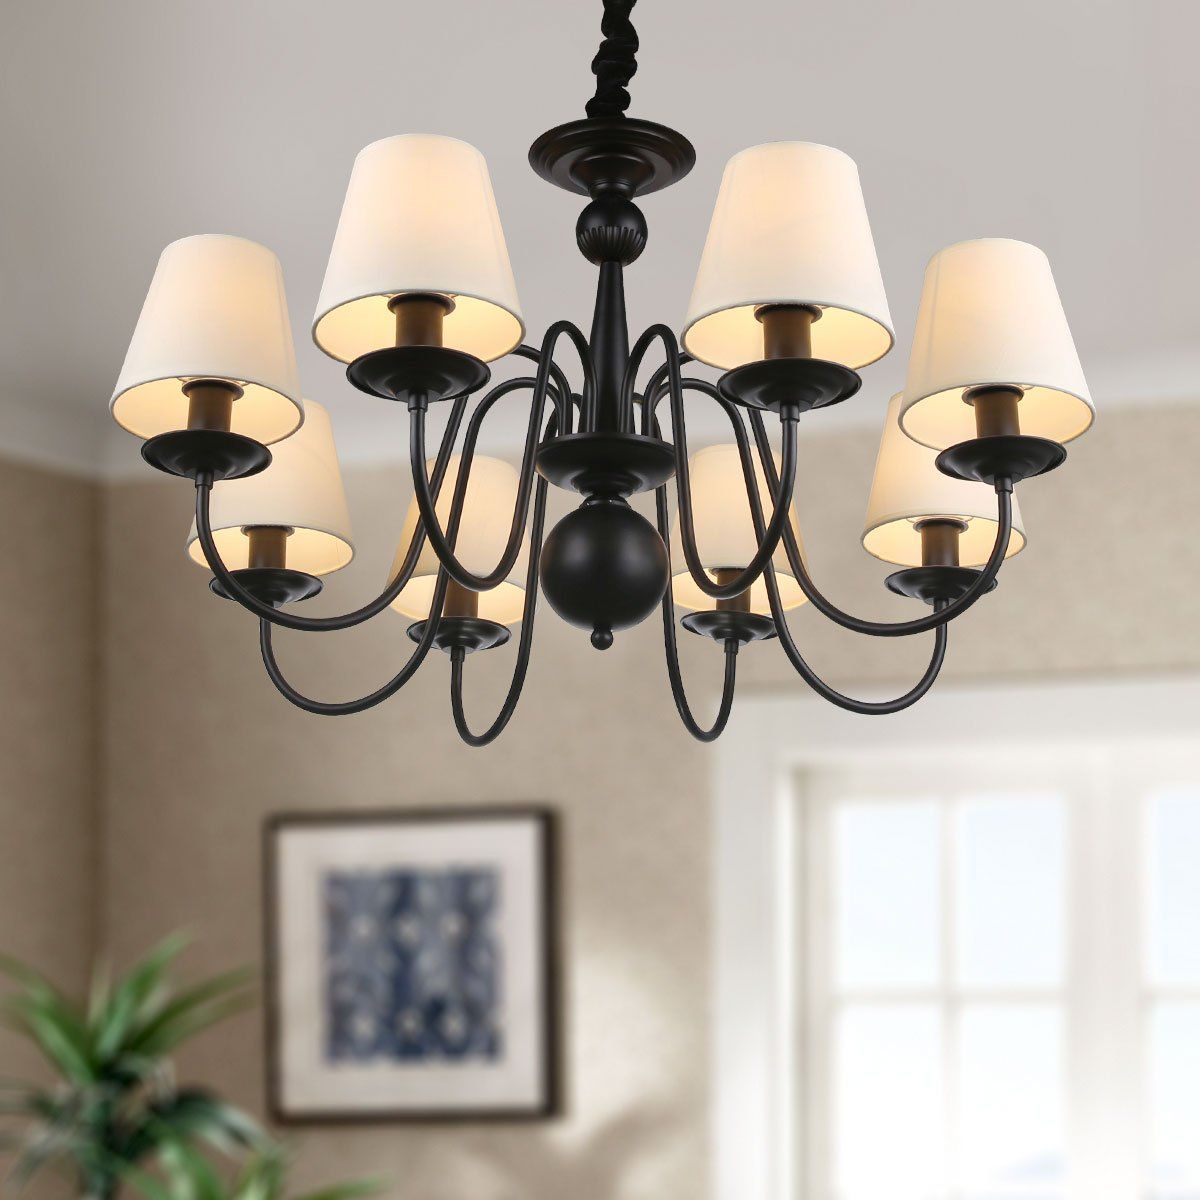 8 Light Black Wrought Iron Chandelier With Cloth Shades (e In Black Iron Eight Light Minimalist Chandeliers (View 12 of 15)